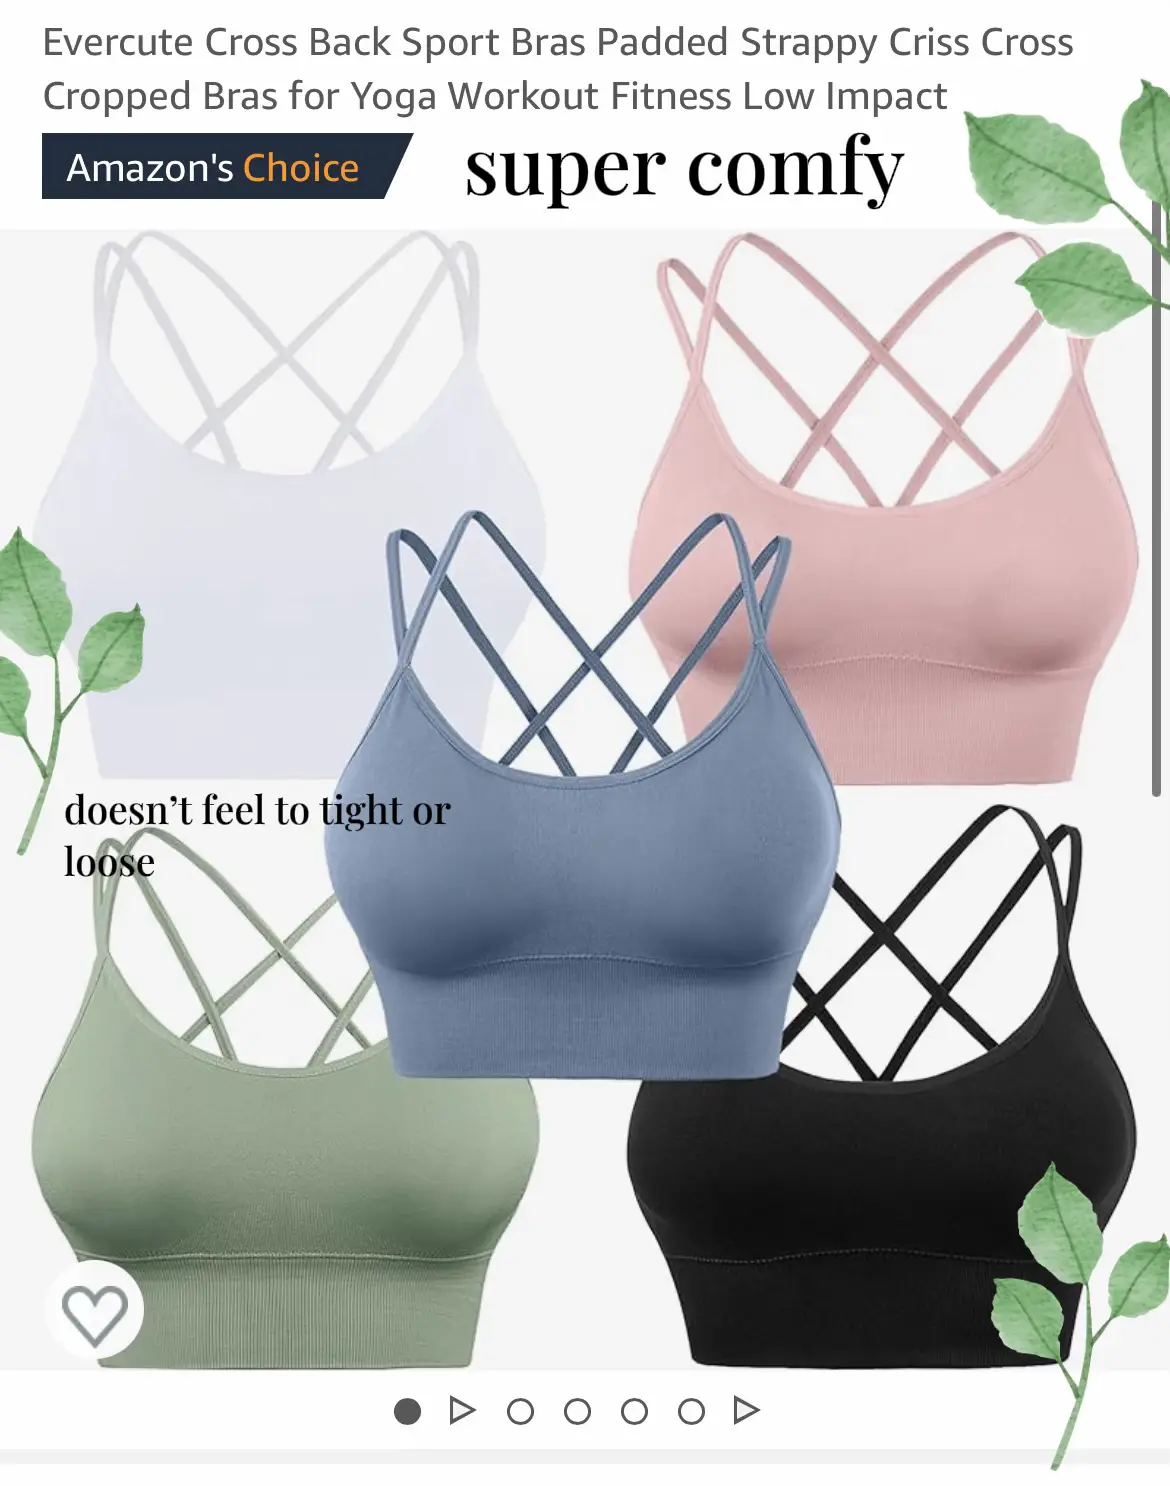 Cross Back Sport Bras Padded Strappy Criss Cross Cropped Bras For Yoga  Workout Fitness Low Impact